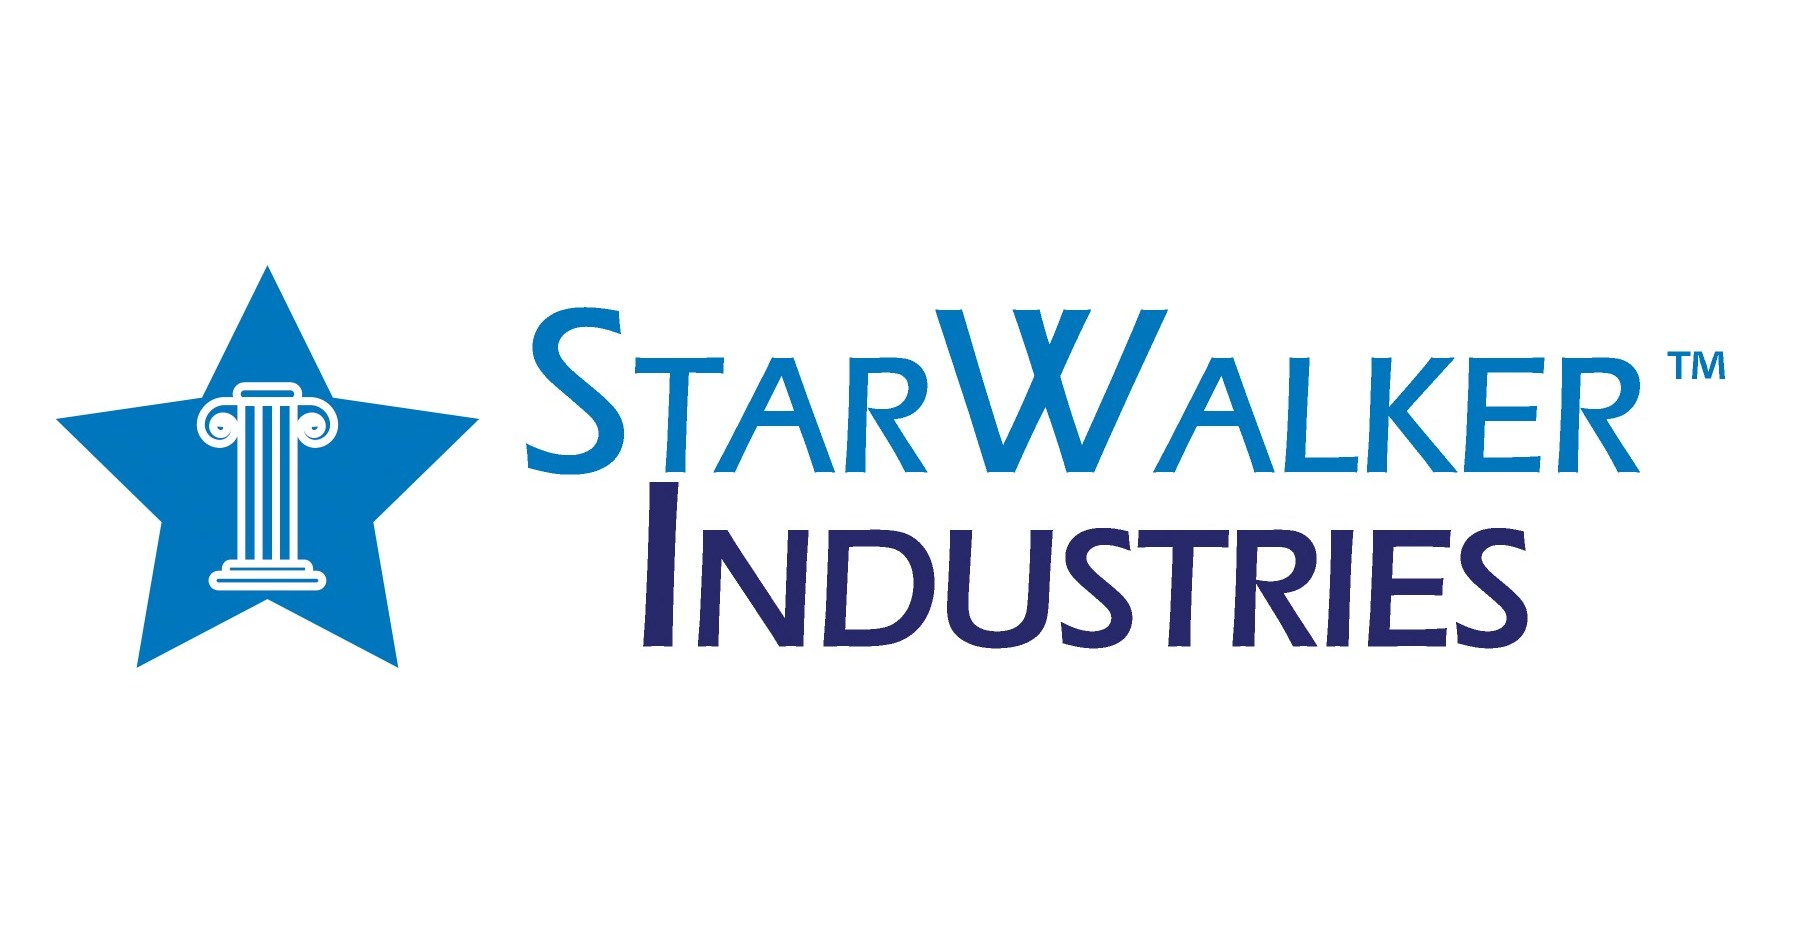 StarWalker Industries Launches Crowdfunding Campaign To Raise $4.6M For First Community Closed-Loop Water Bottling Plant - PRNewswire